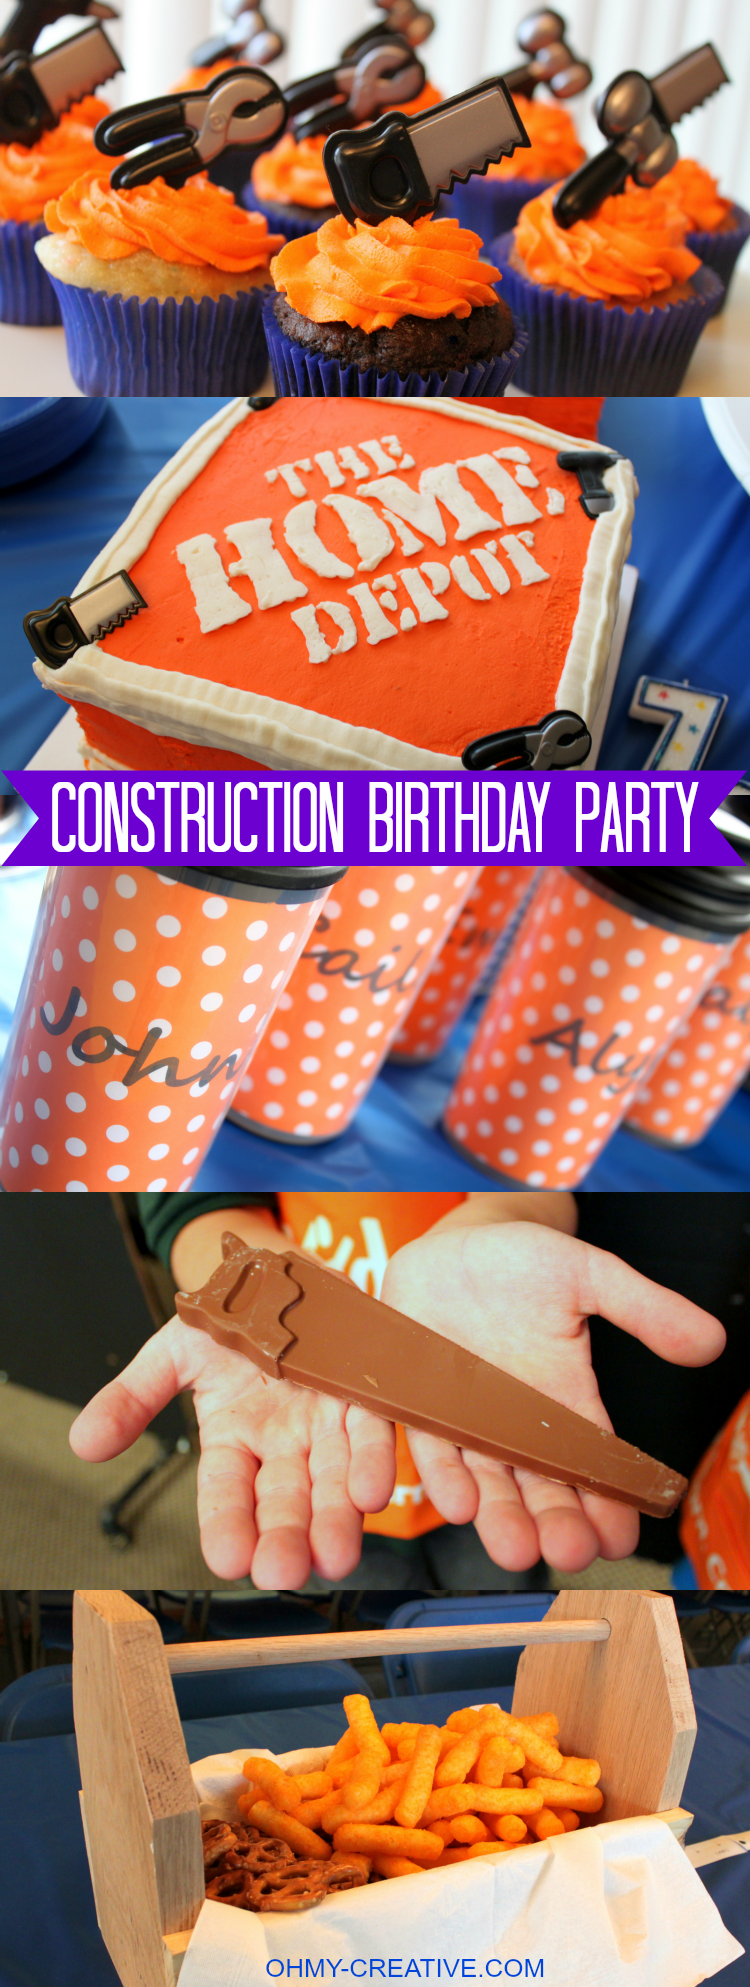 Home Depot Construction Birthday Party - a perfect party theme for the young and old alike! Great ideas for decoration, party favors and dessert tables | OHMY-CREATIVE.COM